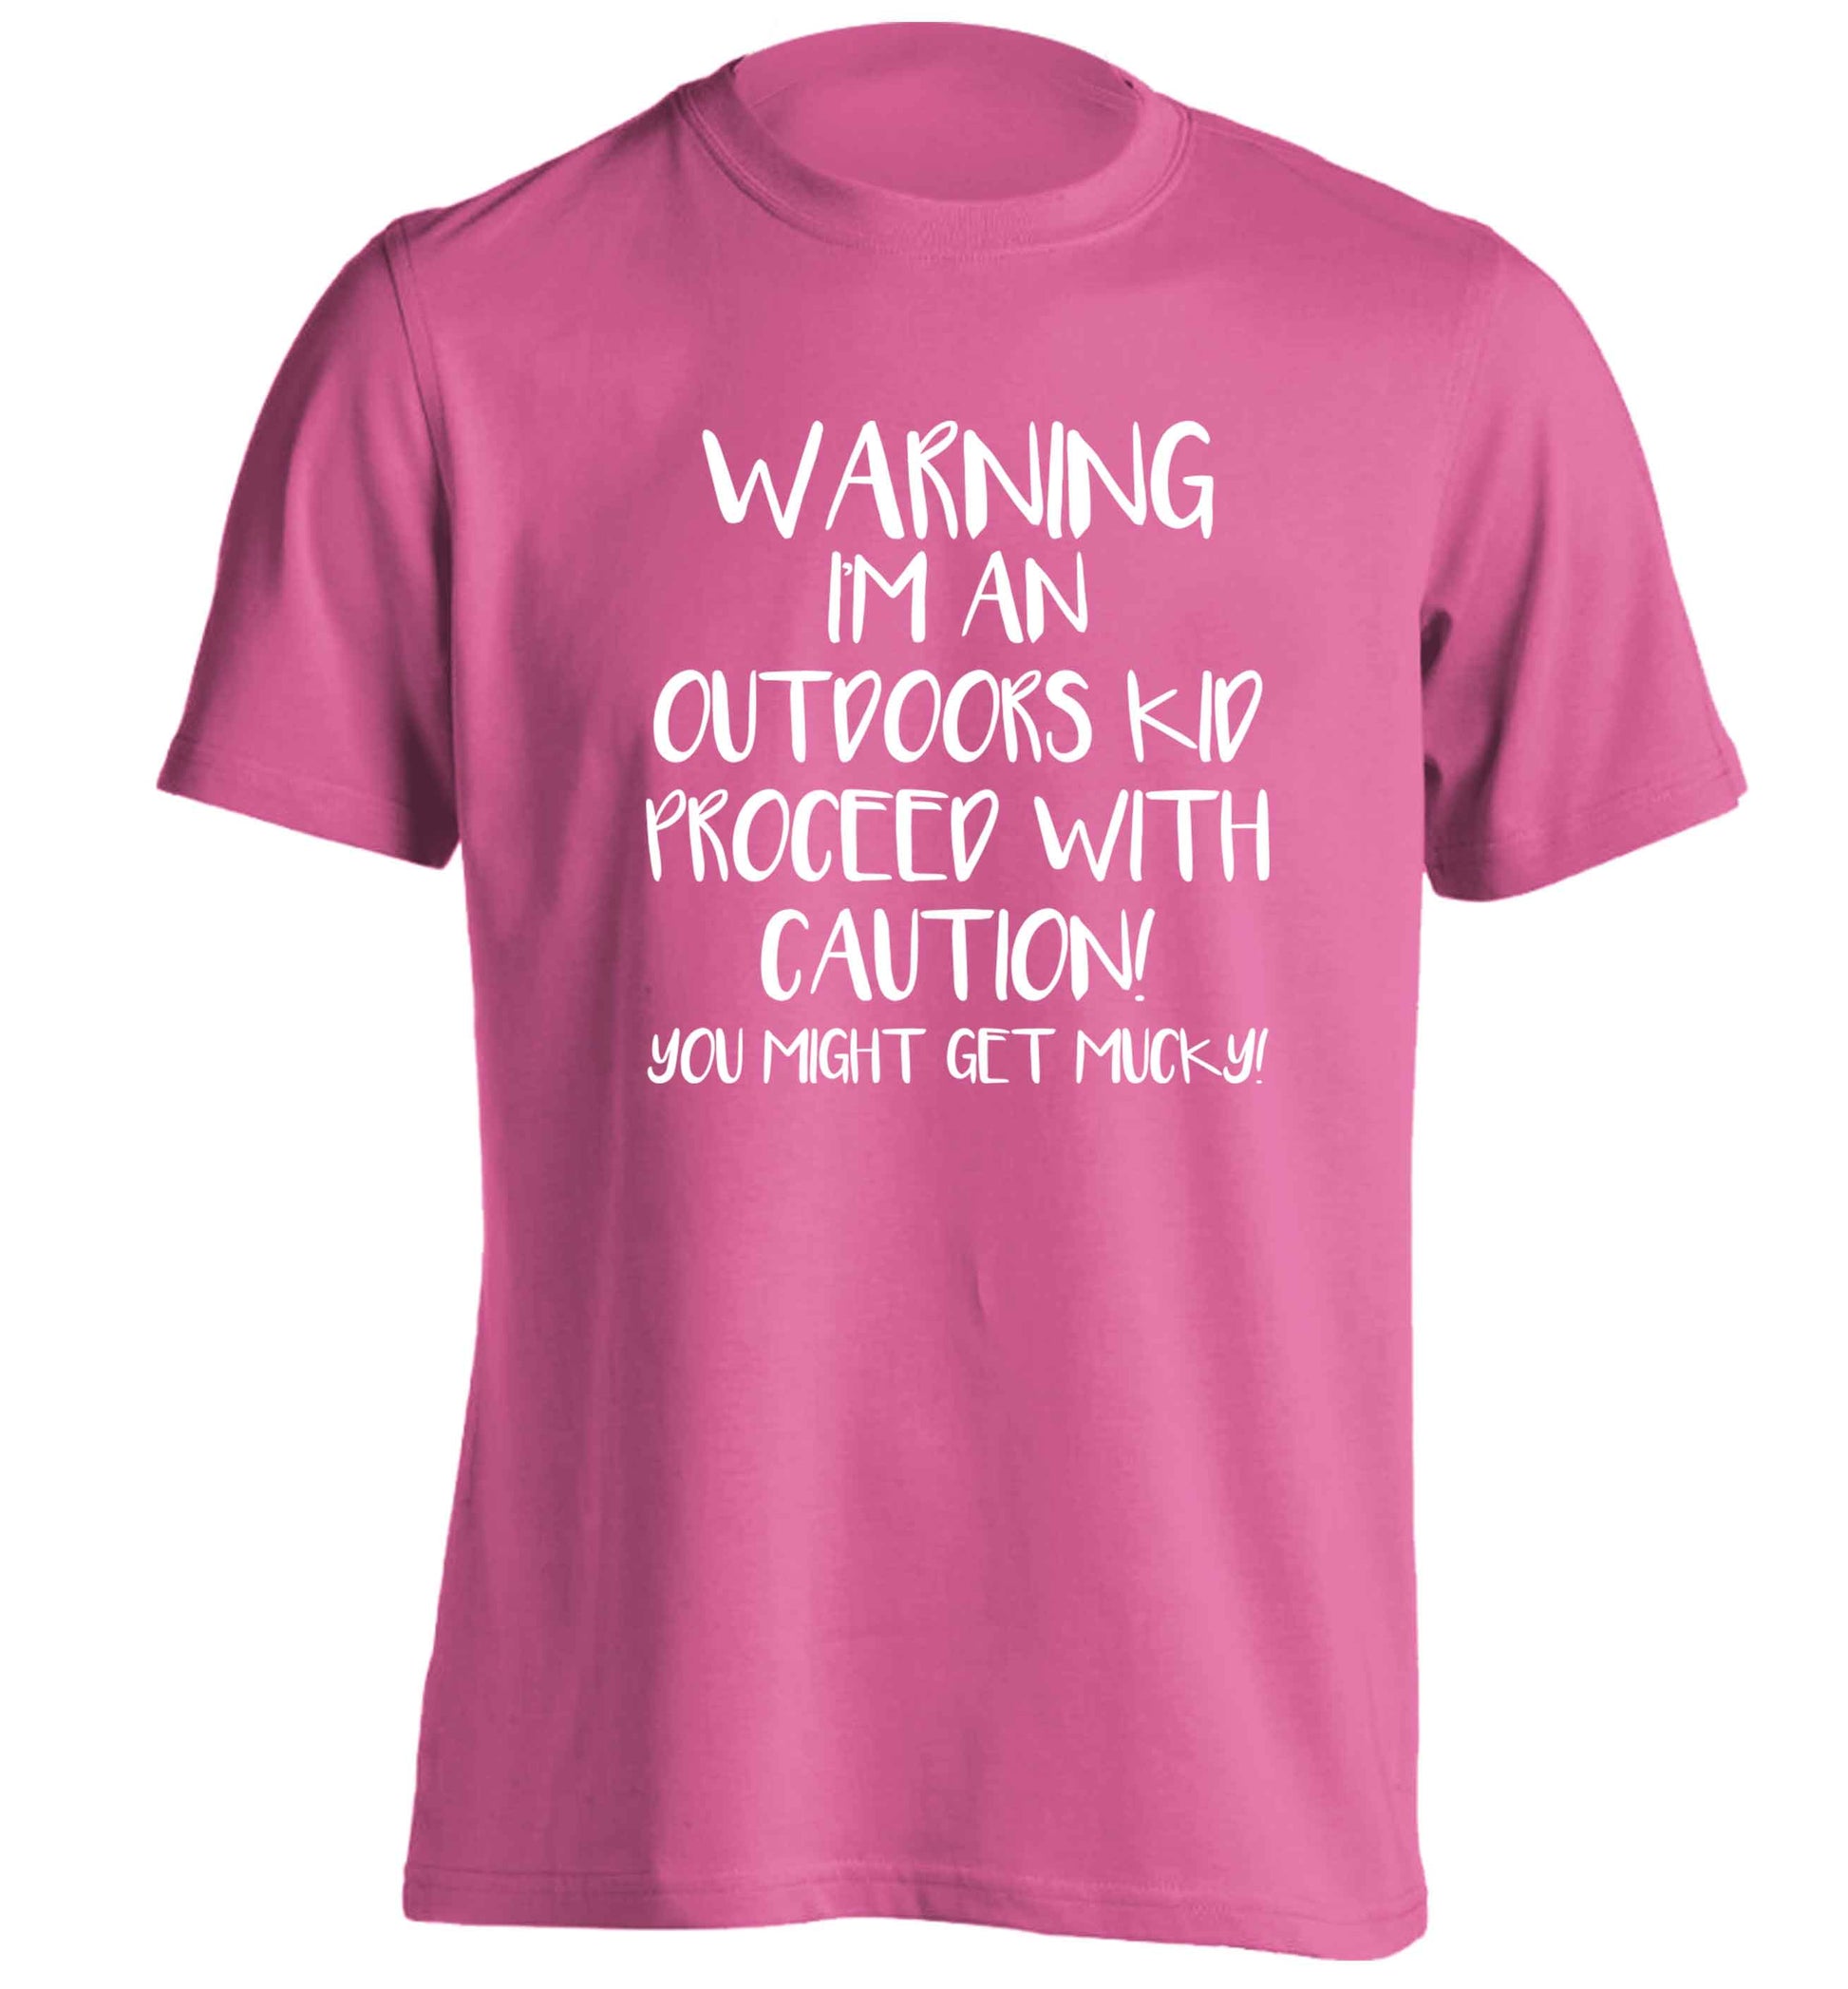 Warning I'm an outdoors kid! Proceed with caution you might get mucky adults unisex pink Tshirt 2XL